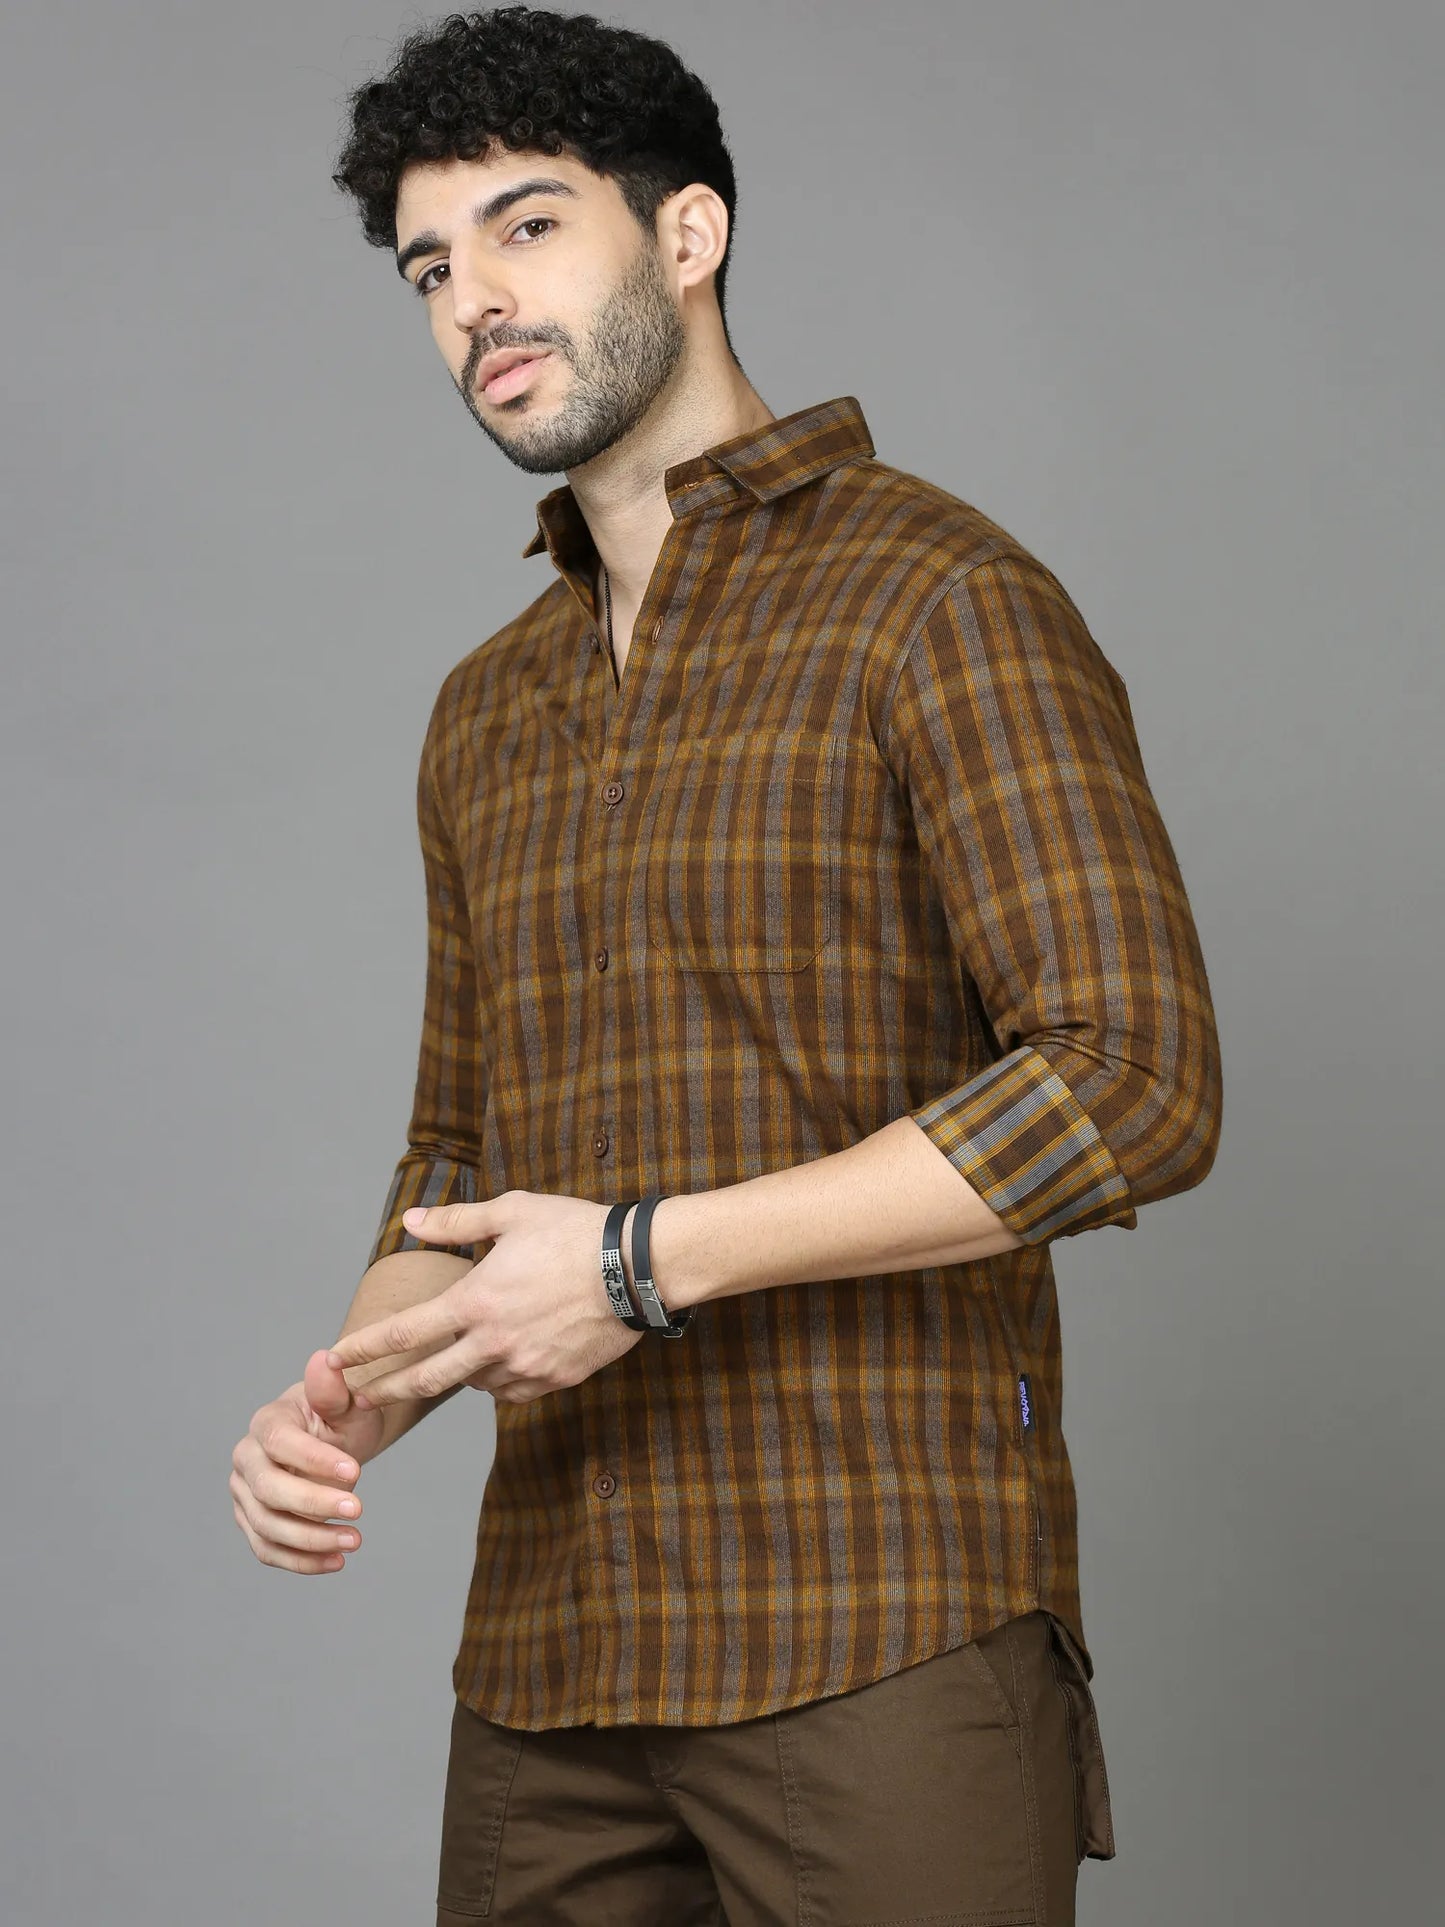 Dusty Tines Brown Chckered Shirt for Men 